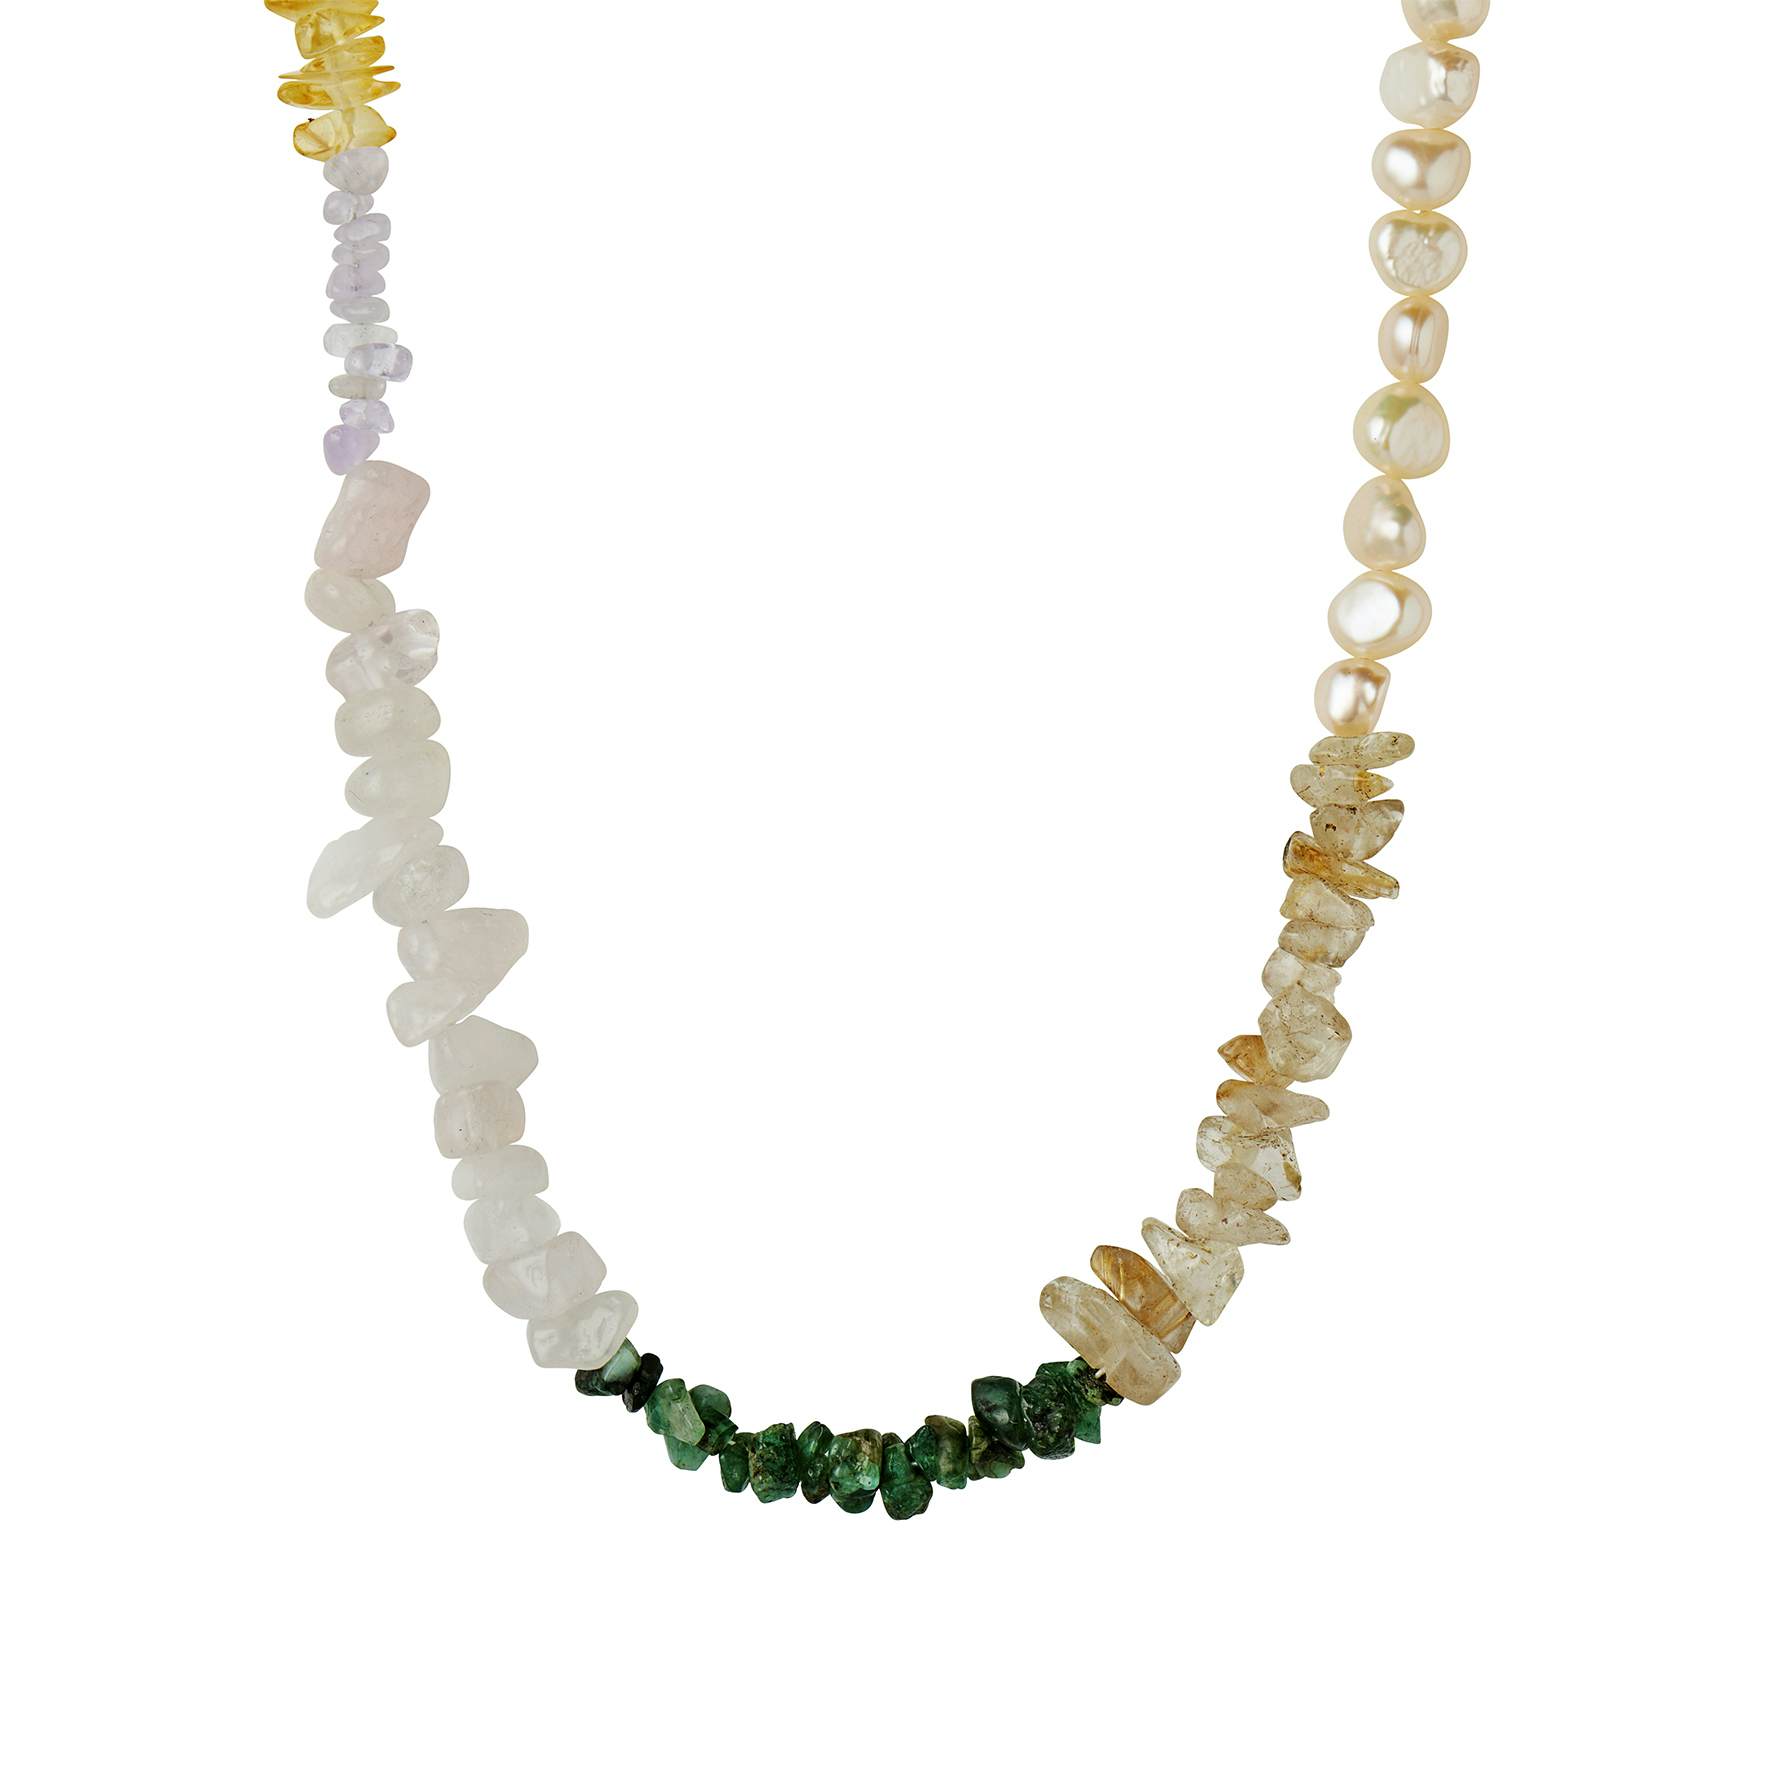 Crispy Coast Necklace - Pacific Colors With Pearls & Gemstones